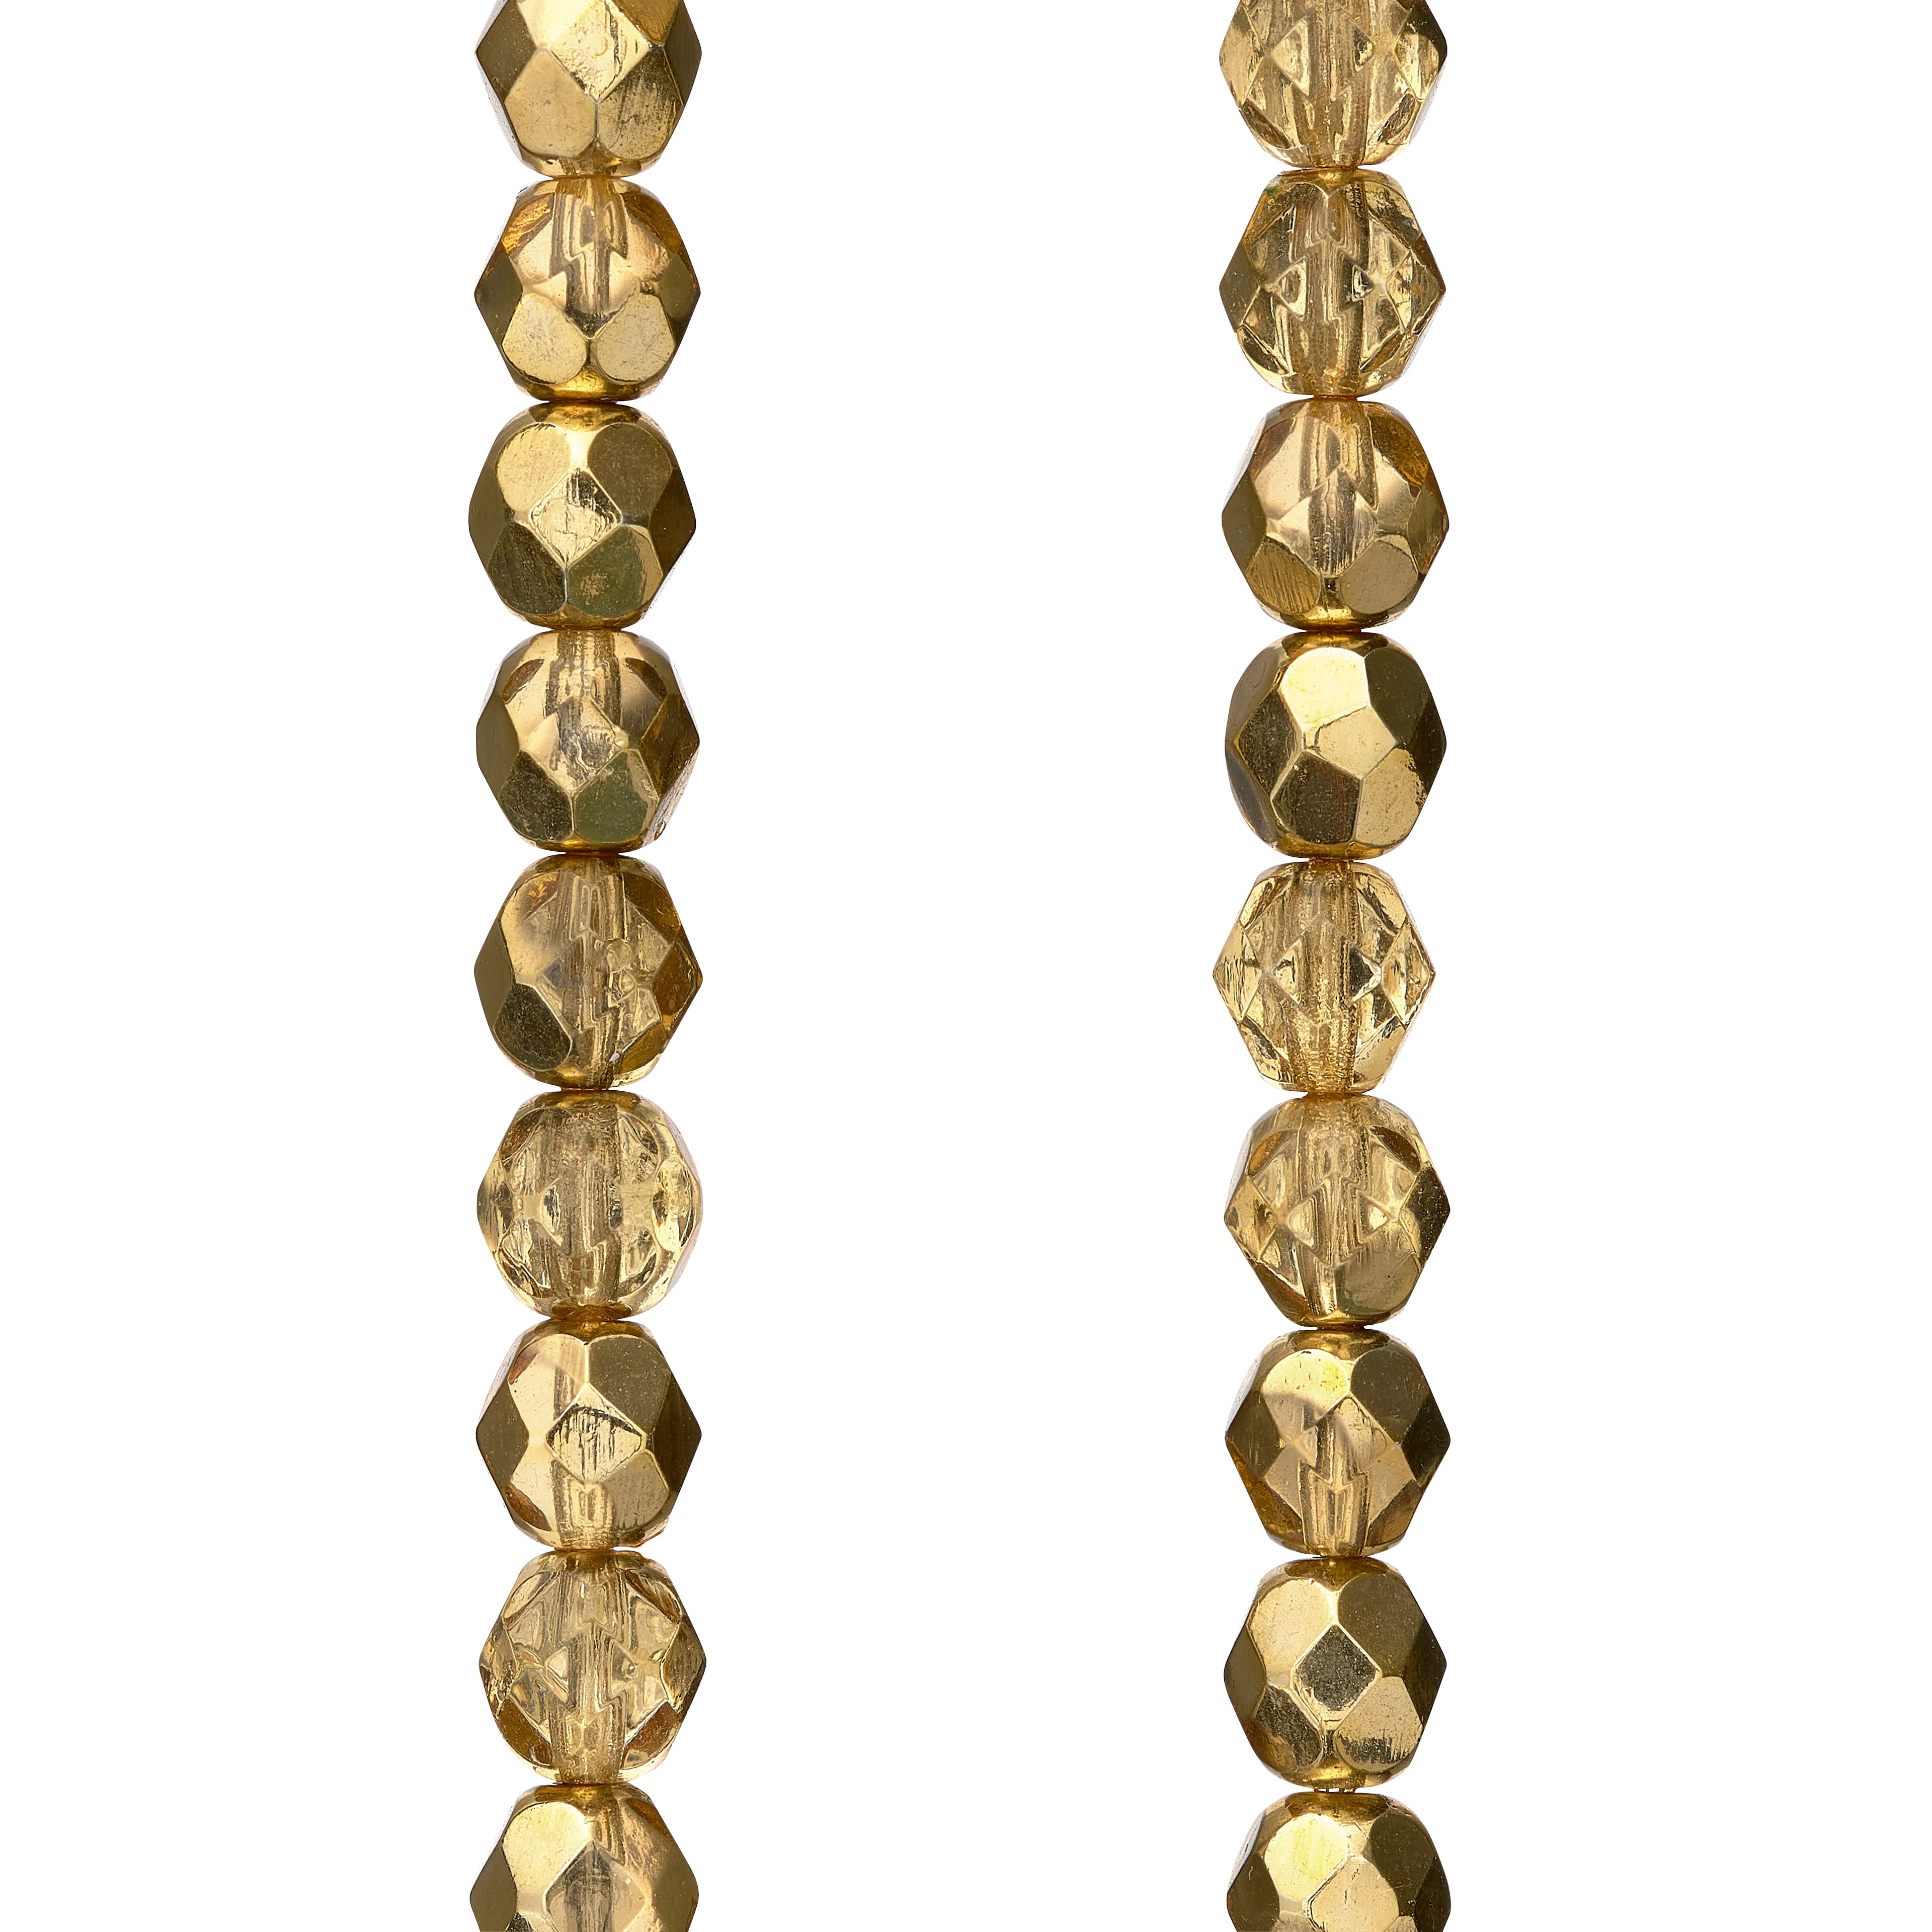 Gold Carved Flower Tube Beads, 10mm by Bead Landing™